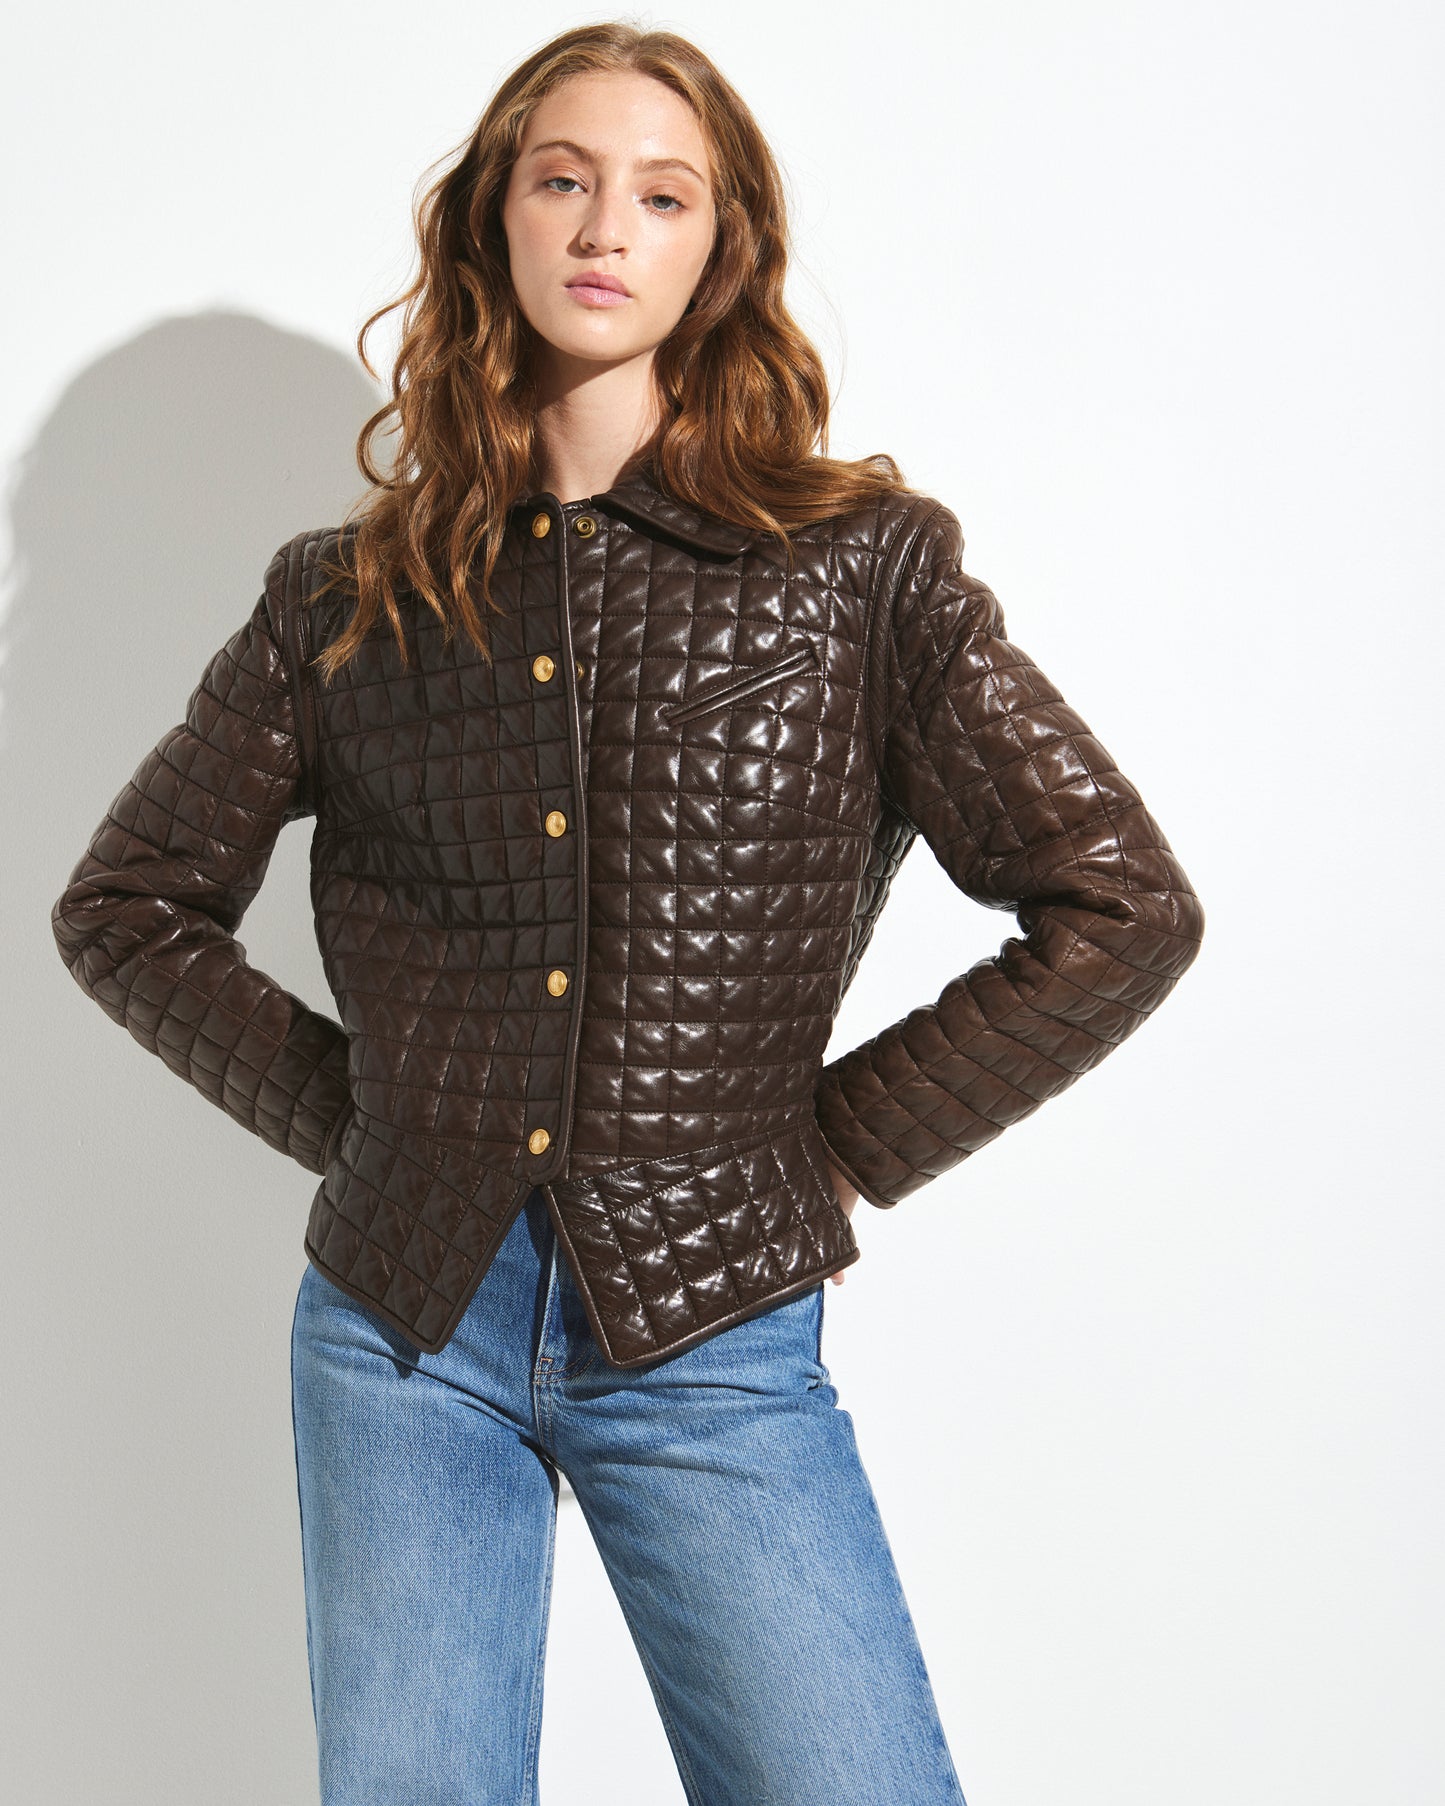 Gucci Quilted Leather Jacket